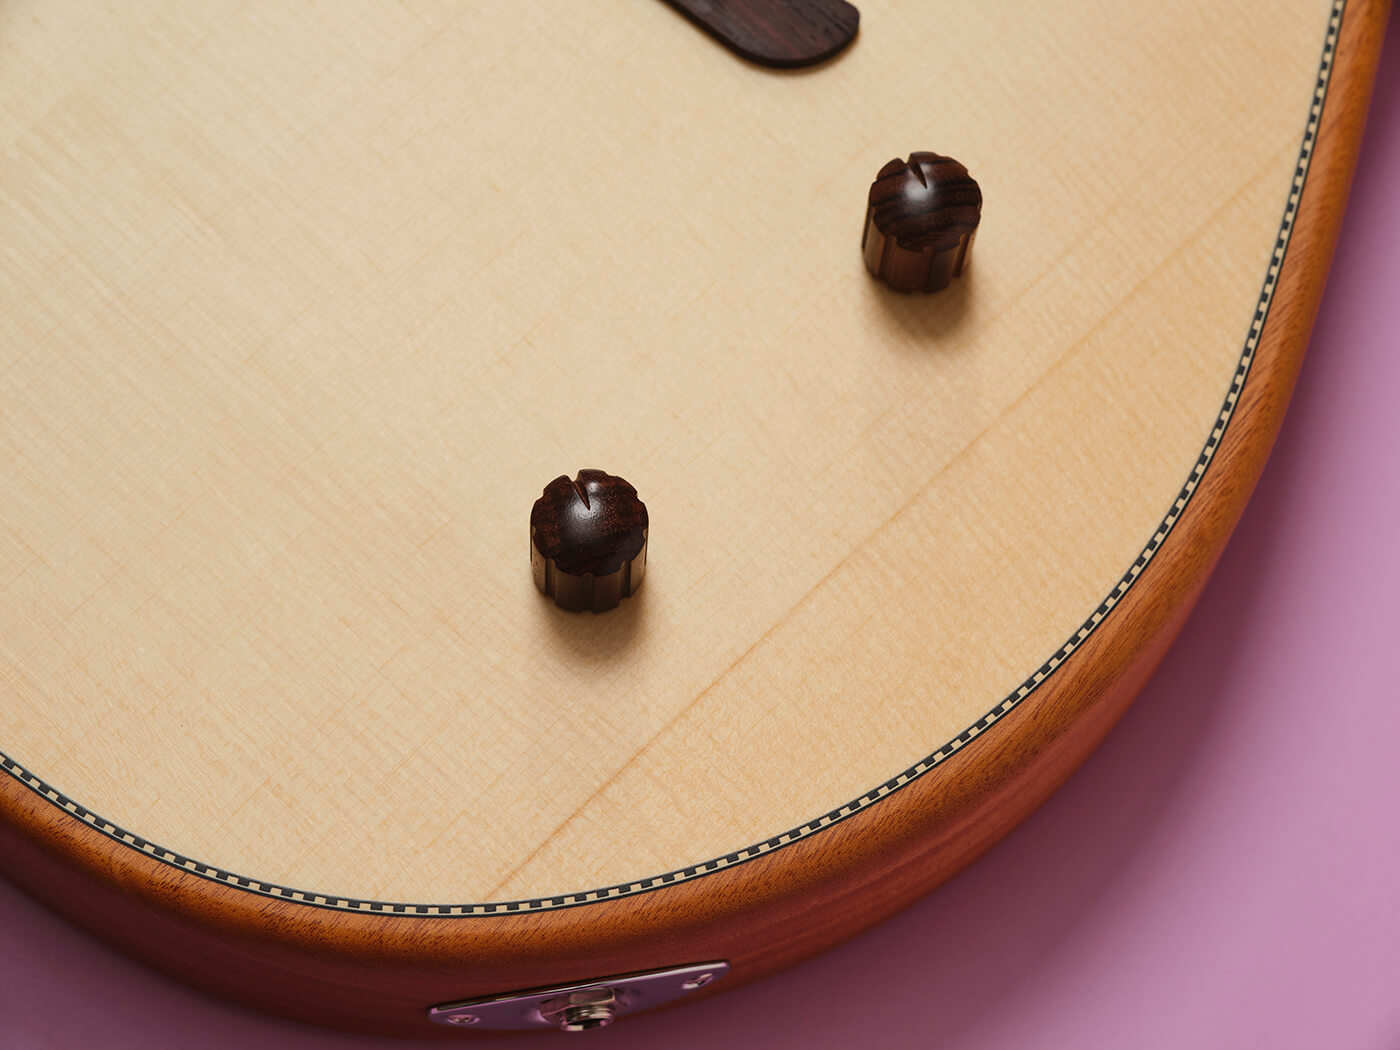 Fender Highway Series Dreadnought control knobs, photo by Adam Gasson